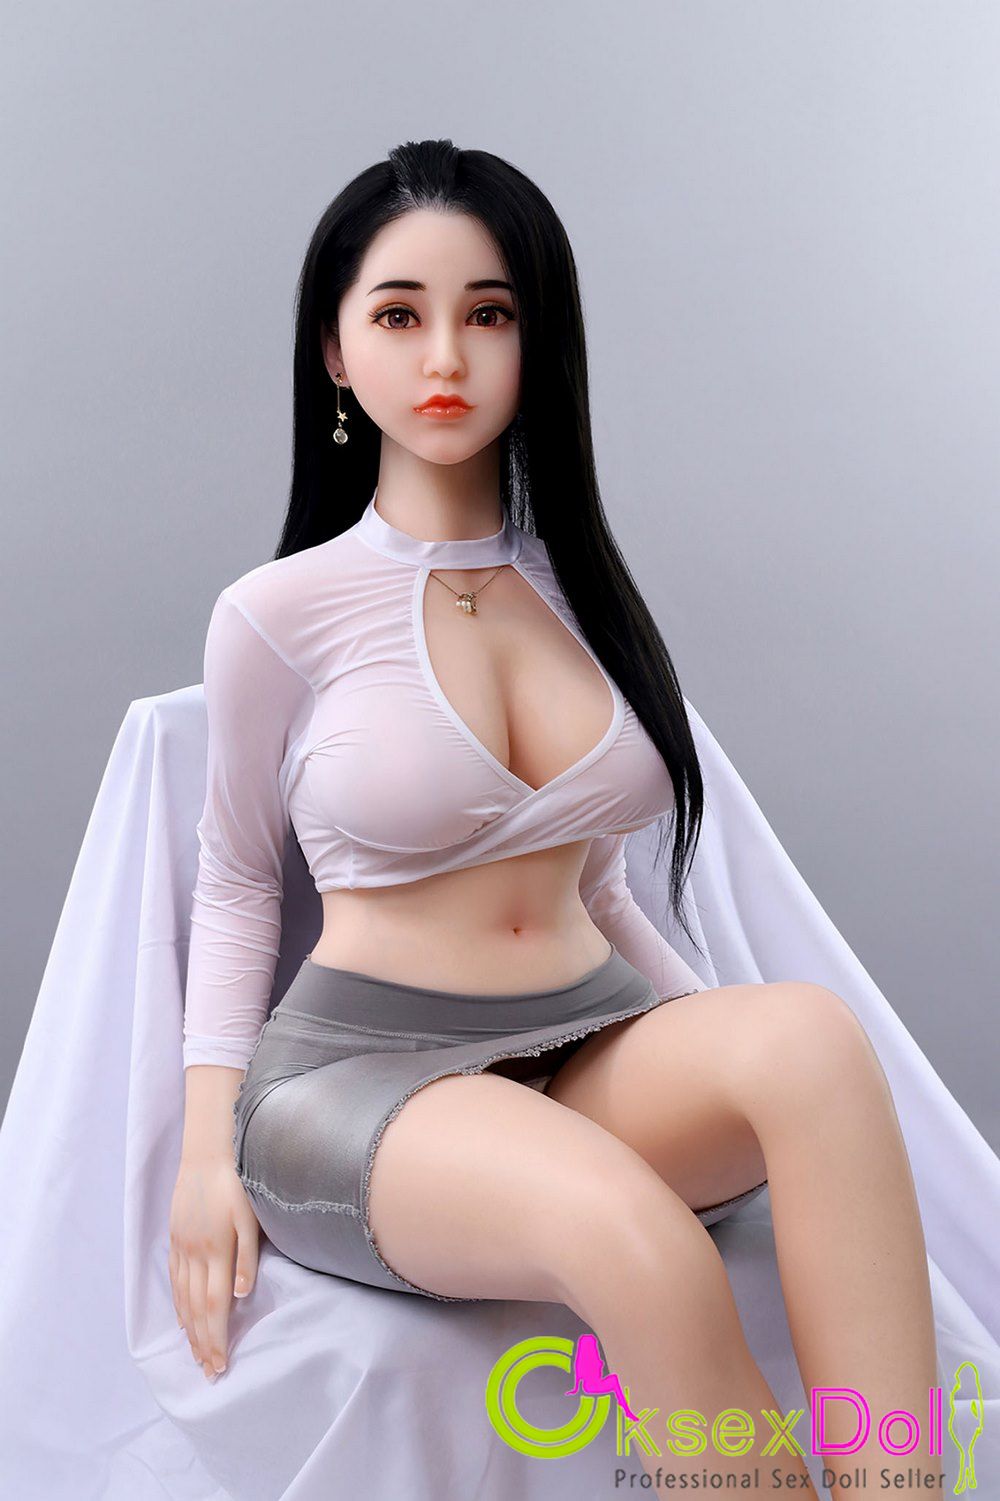 Busty Boobs Real Dolls images